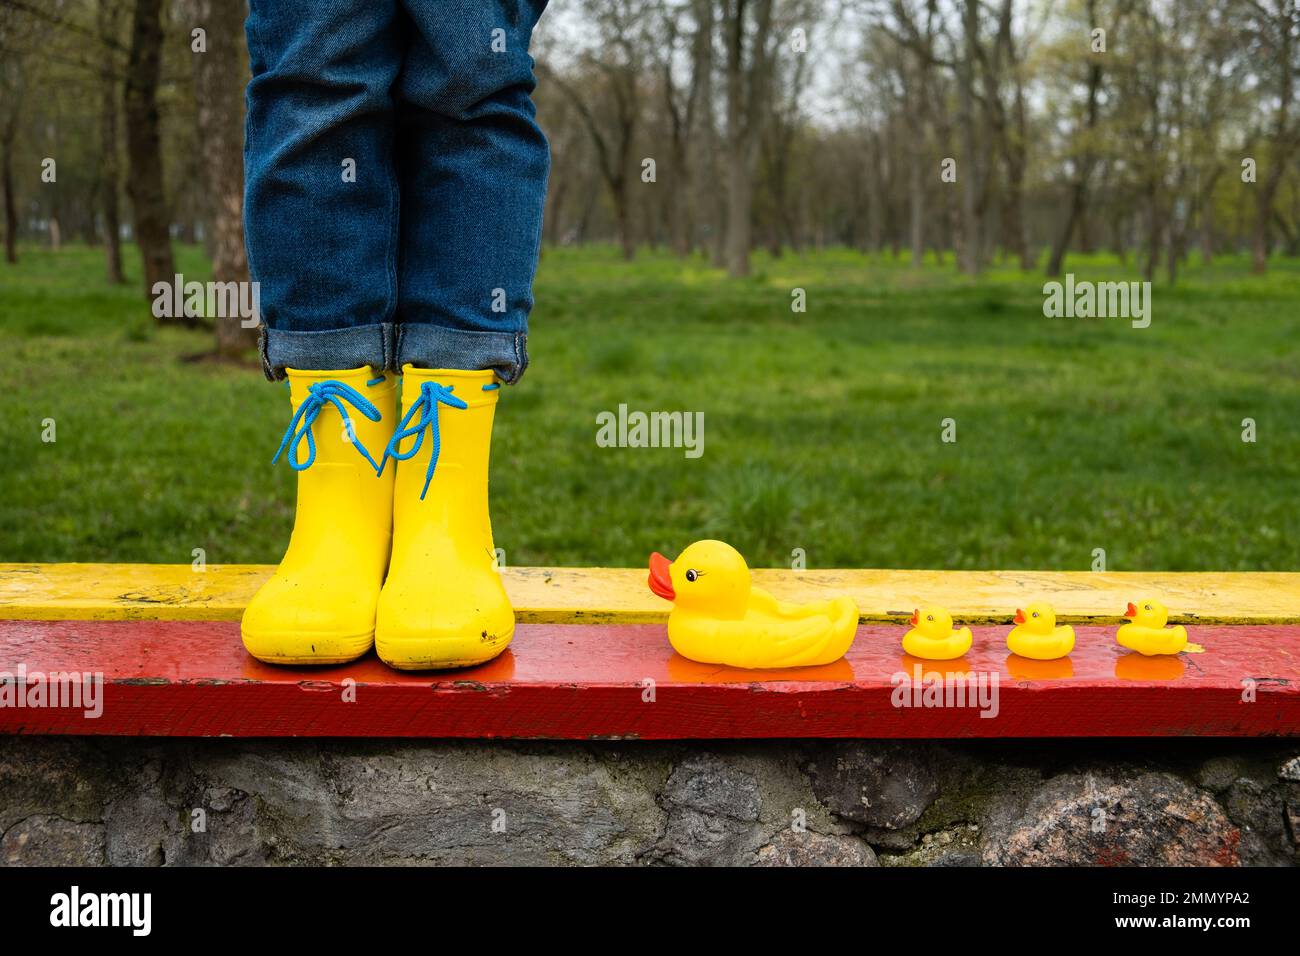 Stress resilience and mental health, no depression concept. Womens legs in yellow rubber boots and a yellow rubber duck in the rain in the park. Stock Photo